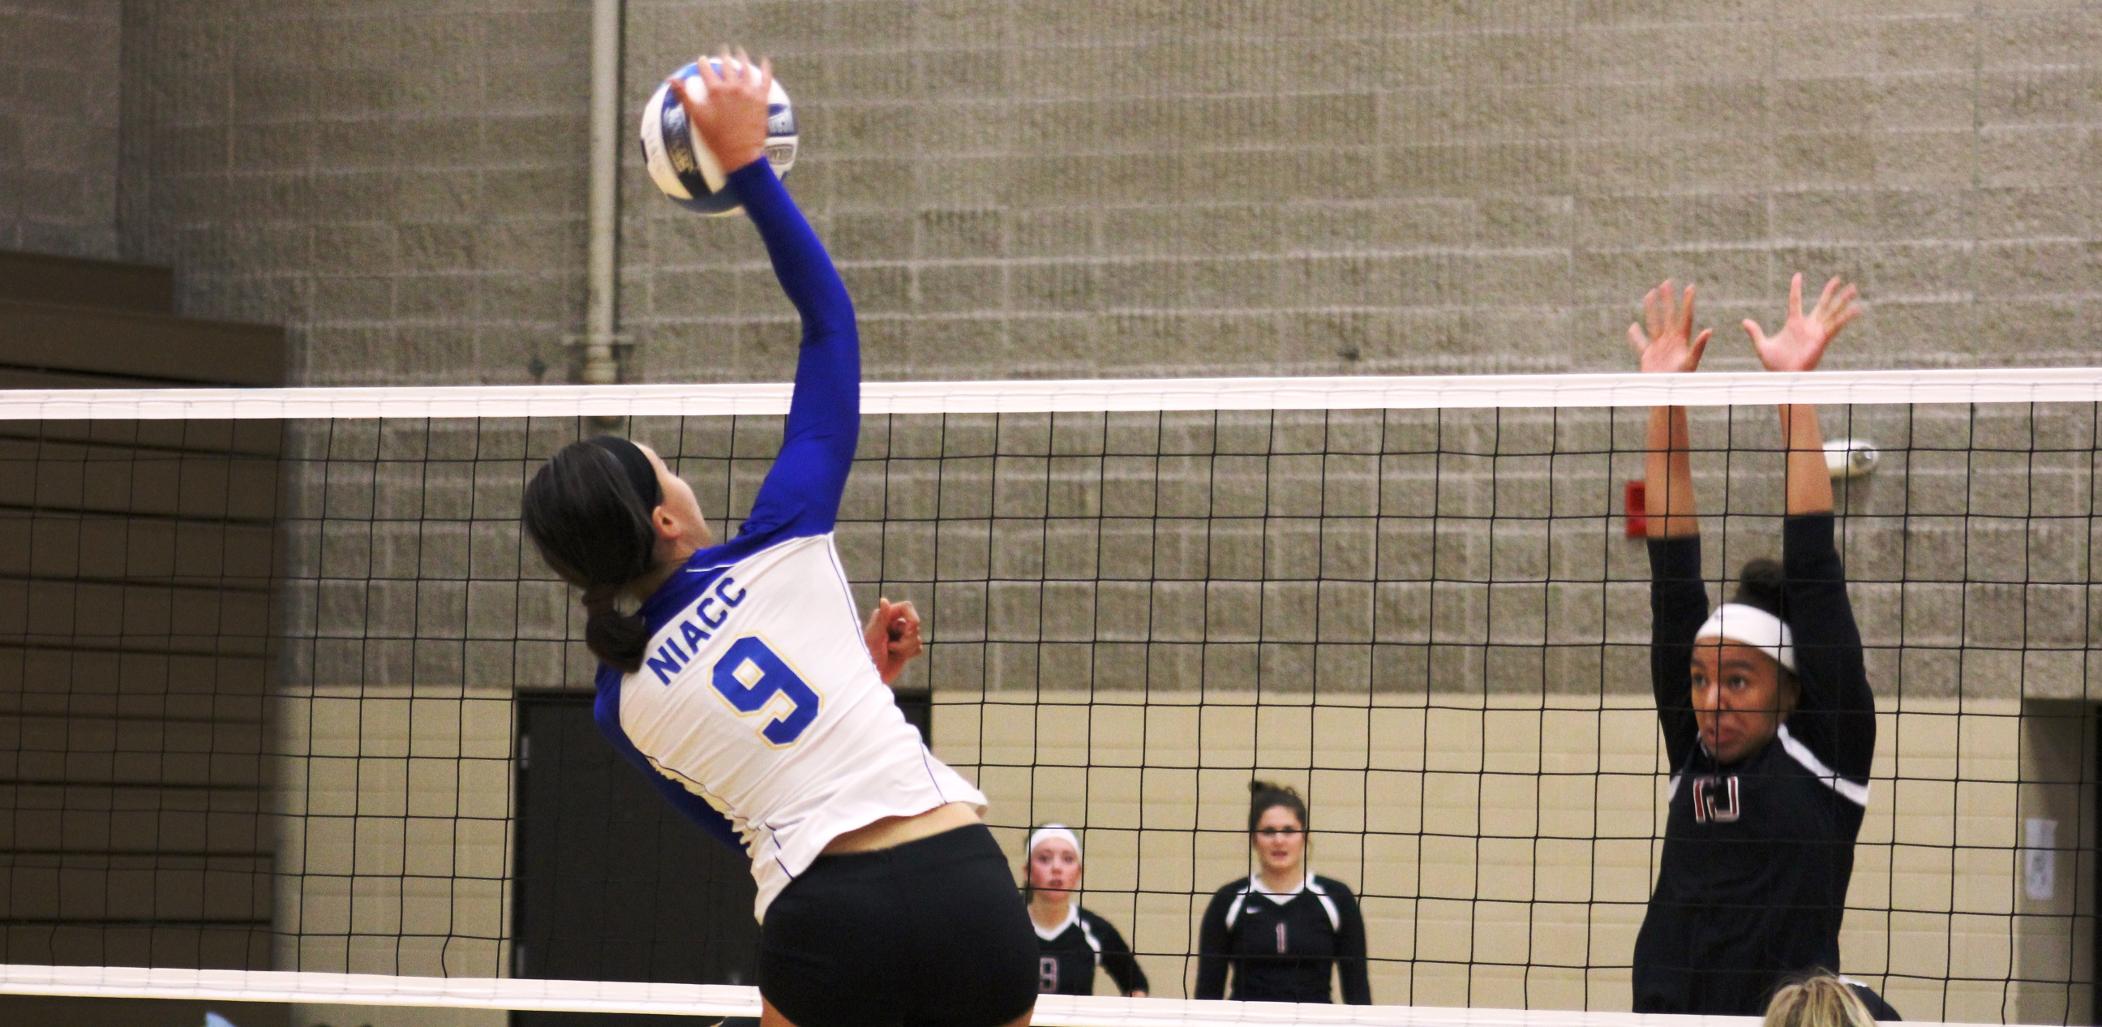 NIACC volleyball team tops Southeastern, 3-1